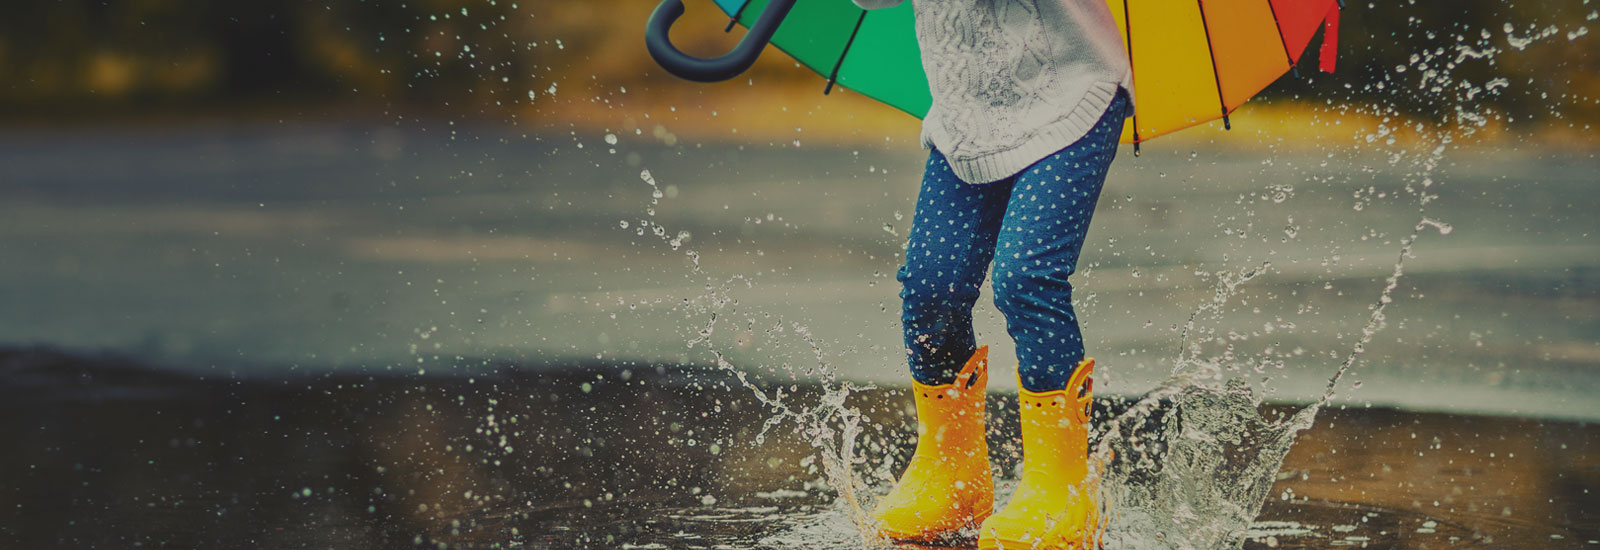 Photo of a child splashing in water in yellow rubber boots